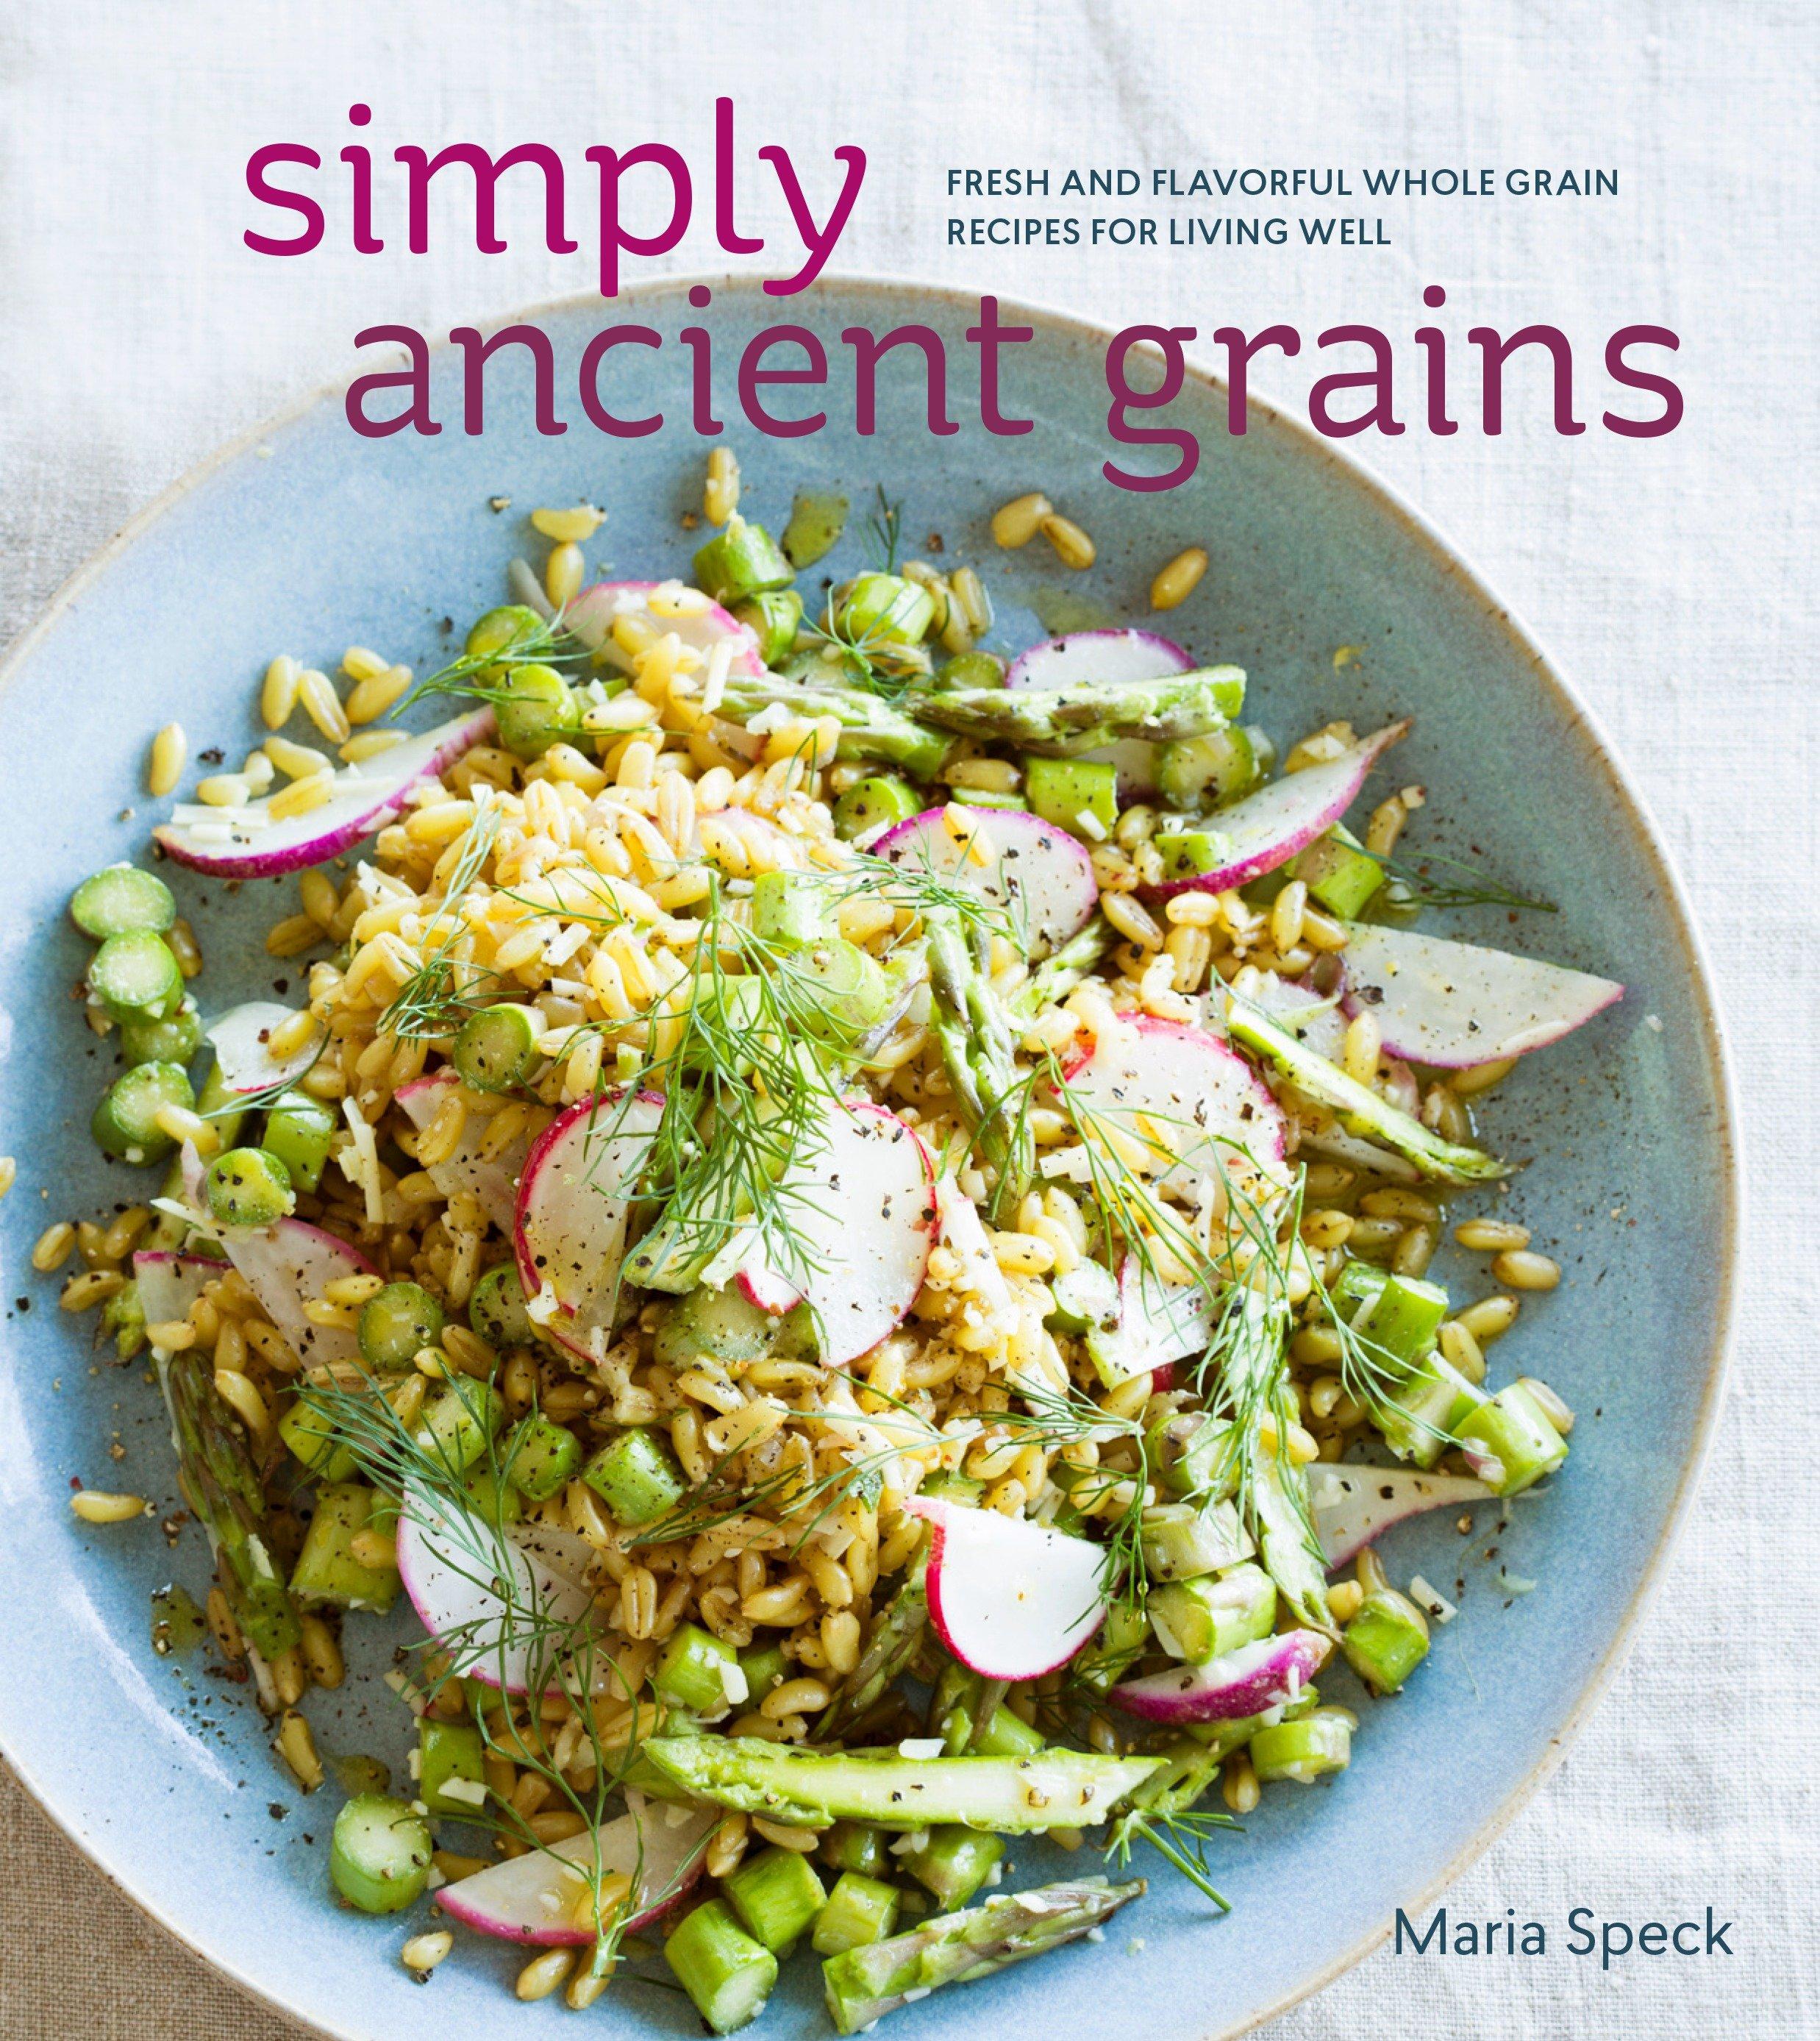 Simply Ancient Grains: Fresh and Flavorful Whole Grain Recipes for Living Well [A Cookbook] - Maria Speck